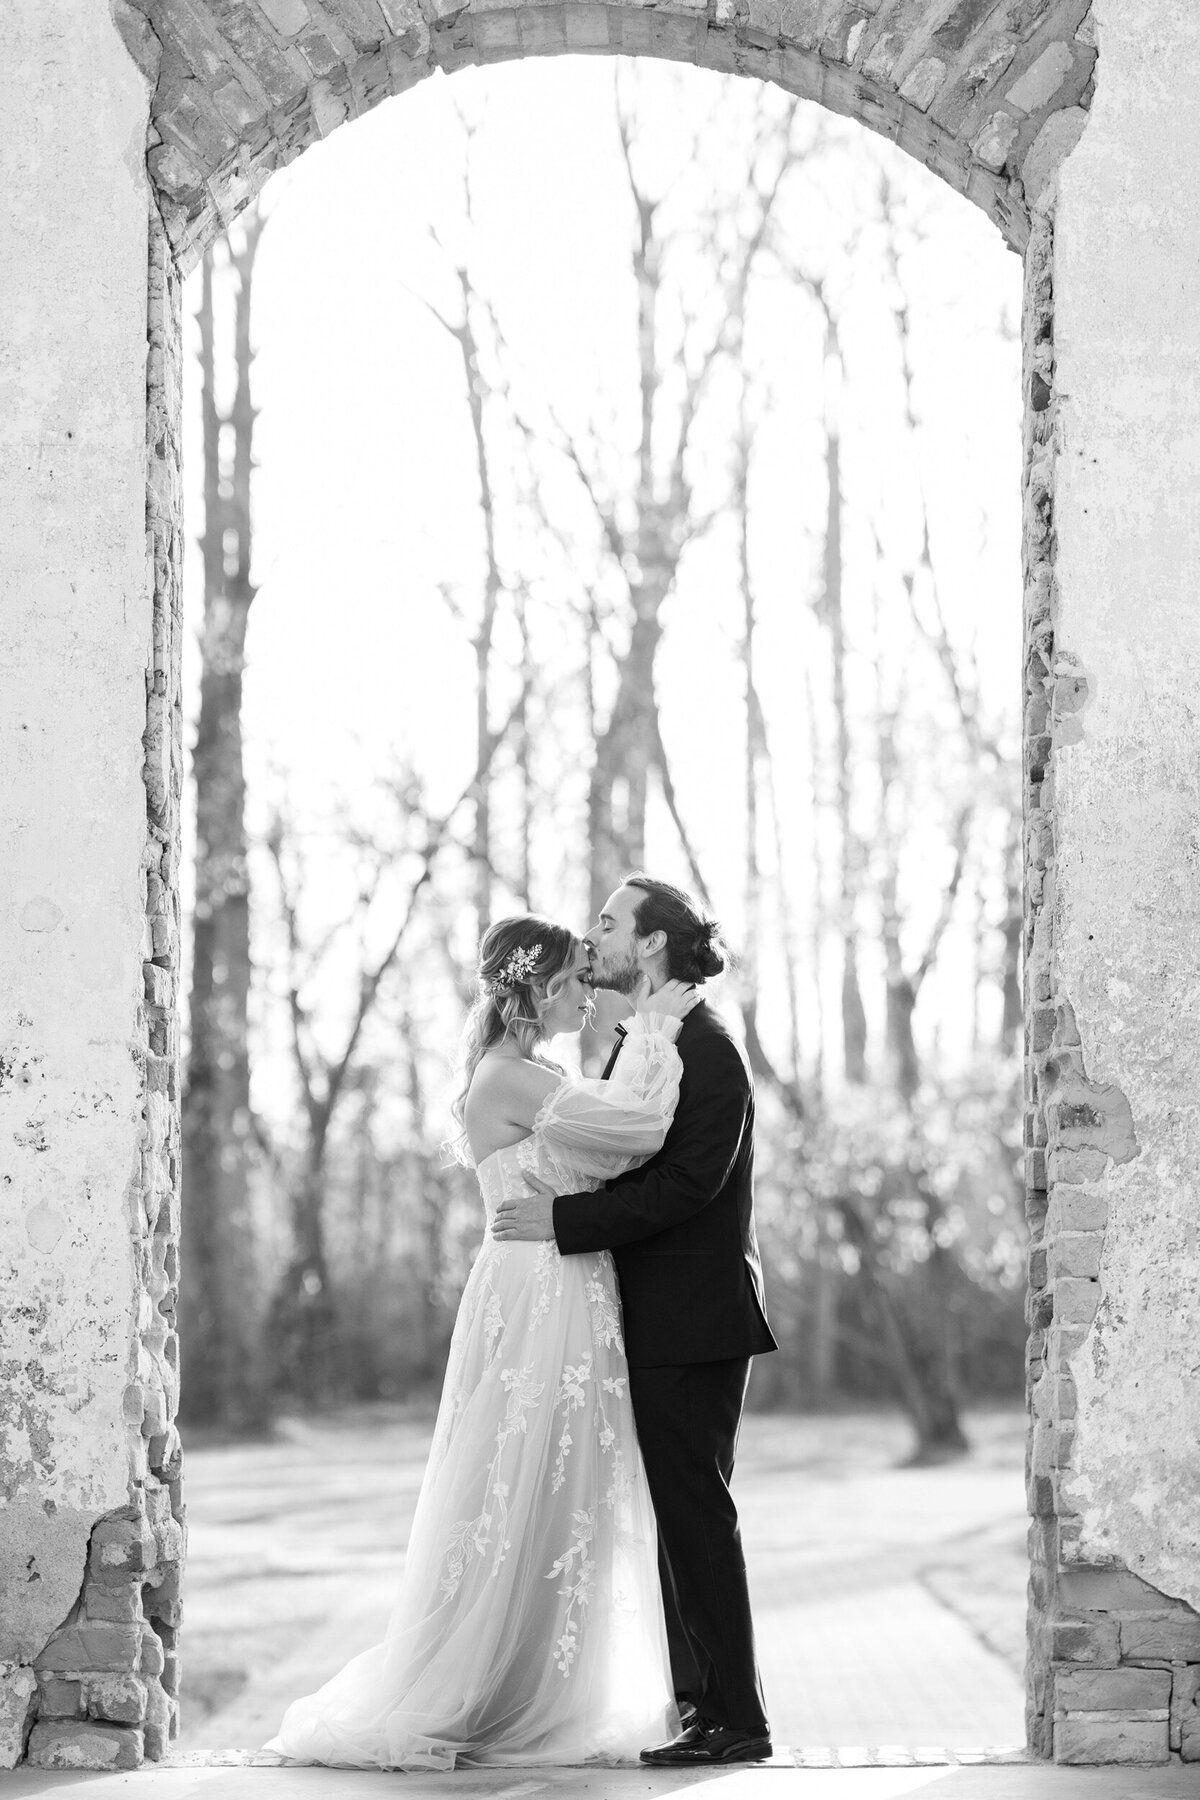 A black and white photo of a groom embracing and kissing his bride on her forehead in the doorway of the historic Providence Cotton Mill wedding venue near Charlotte, NC.